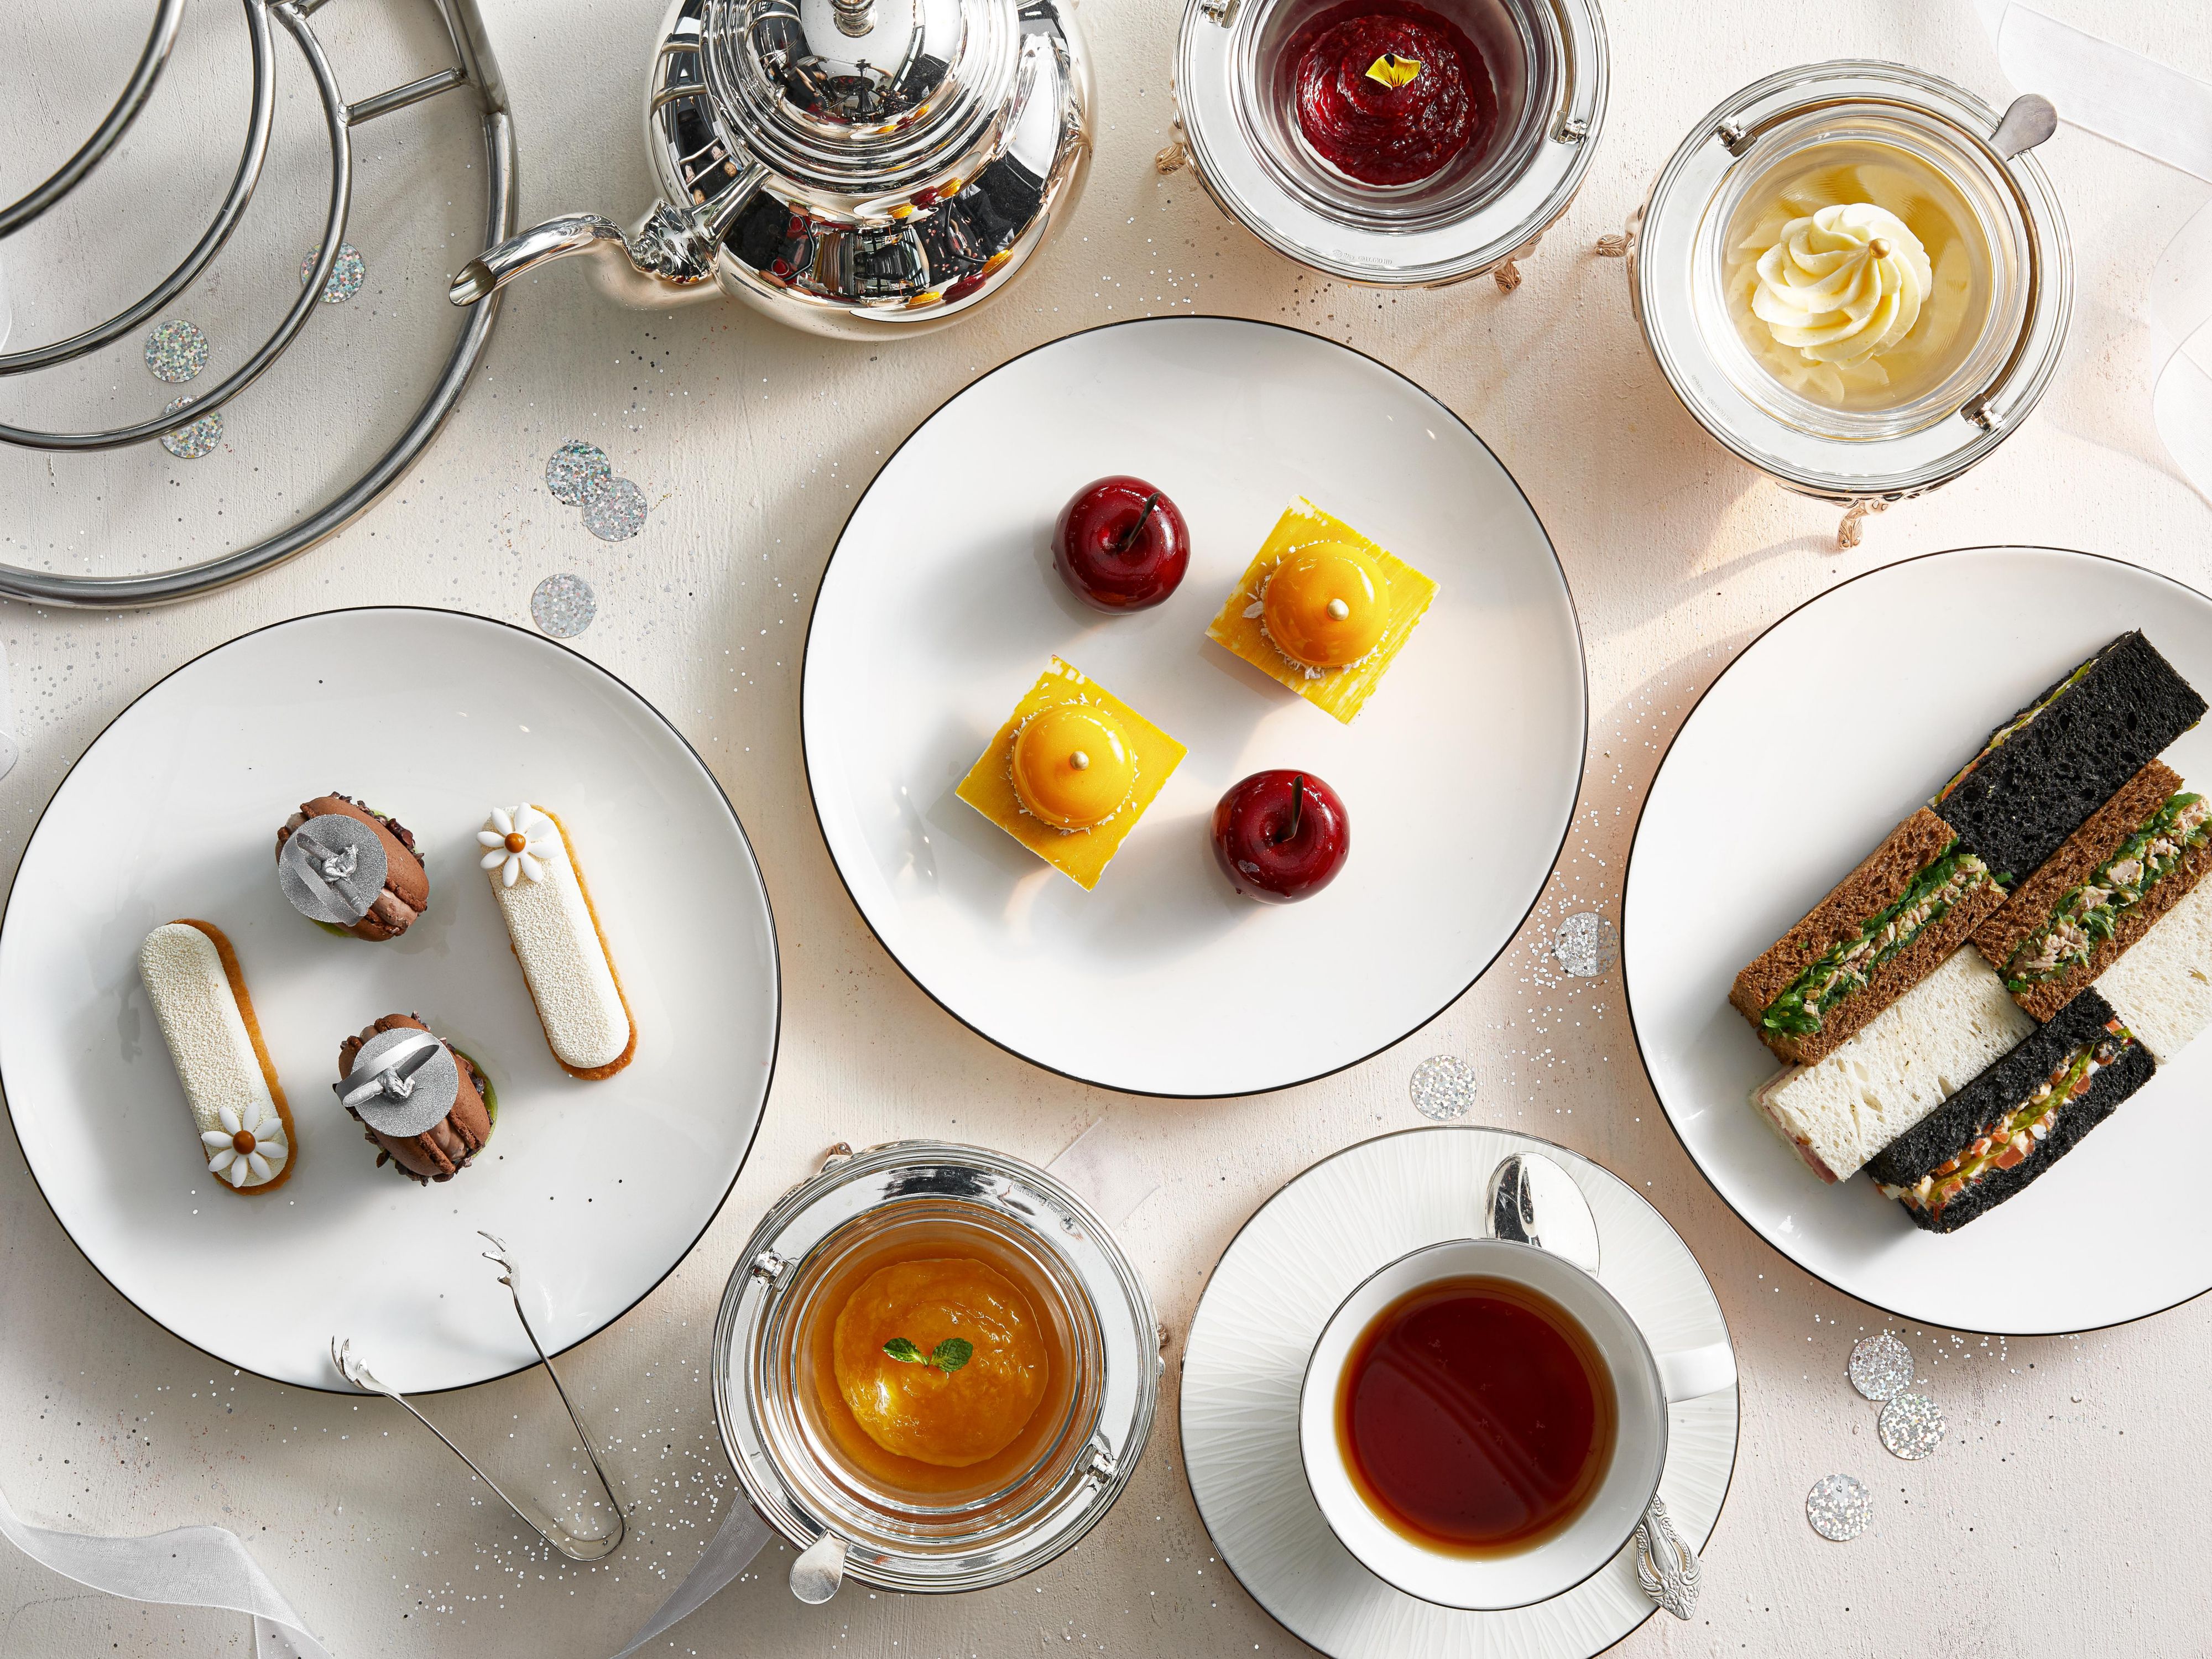 Our Legendary Afternoon Tea